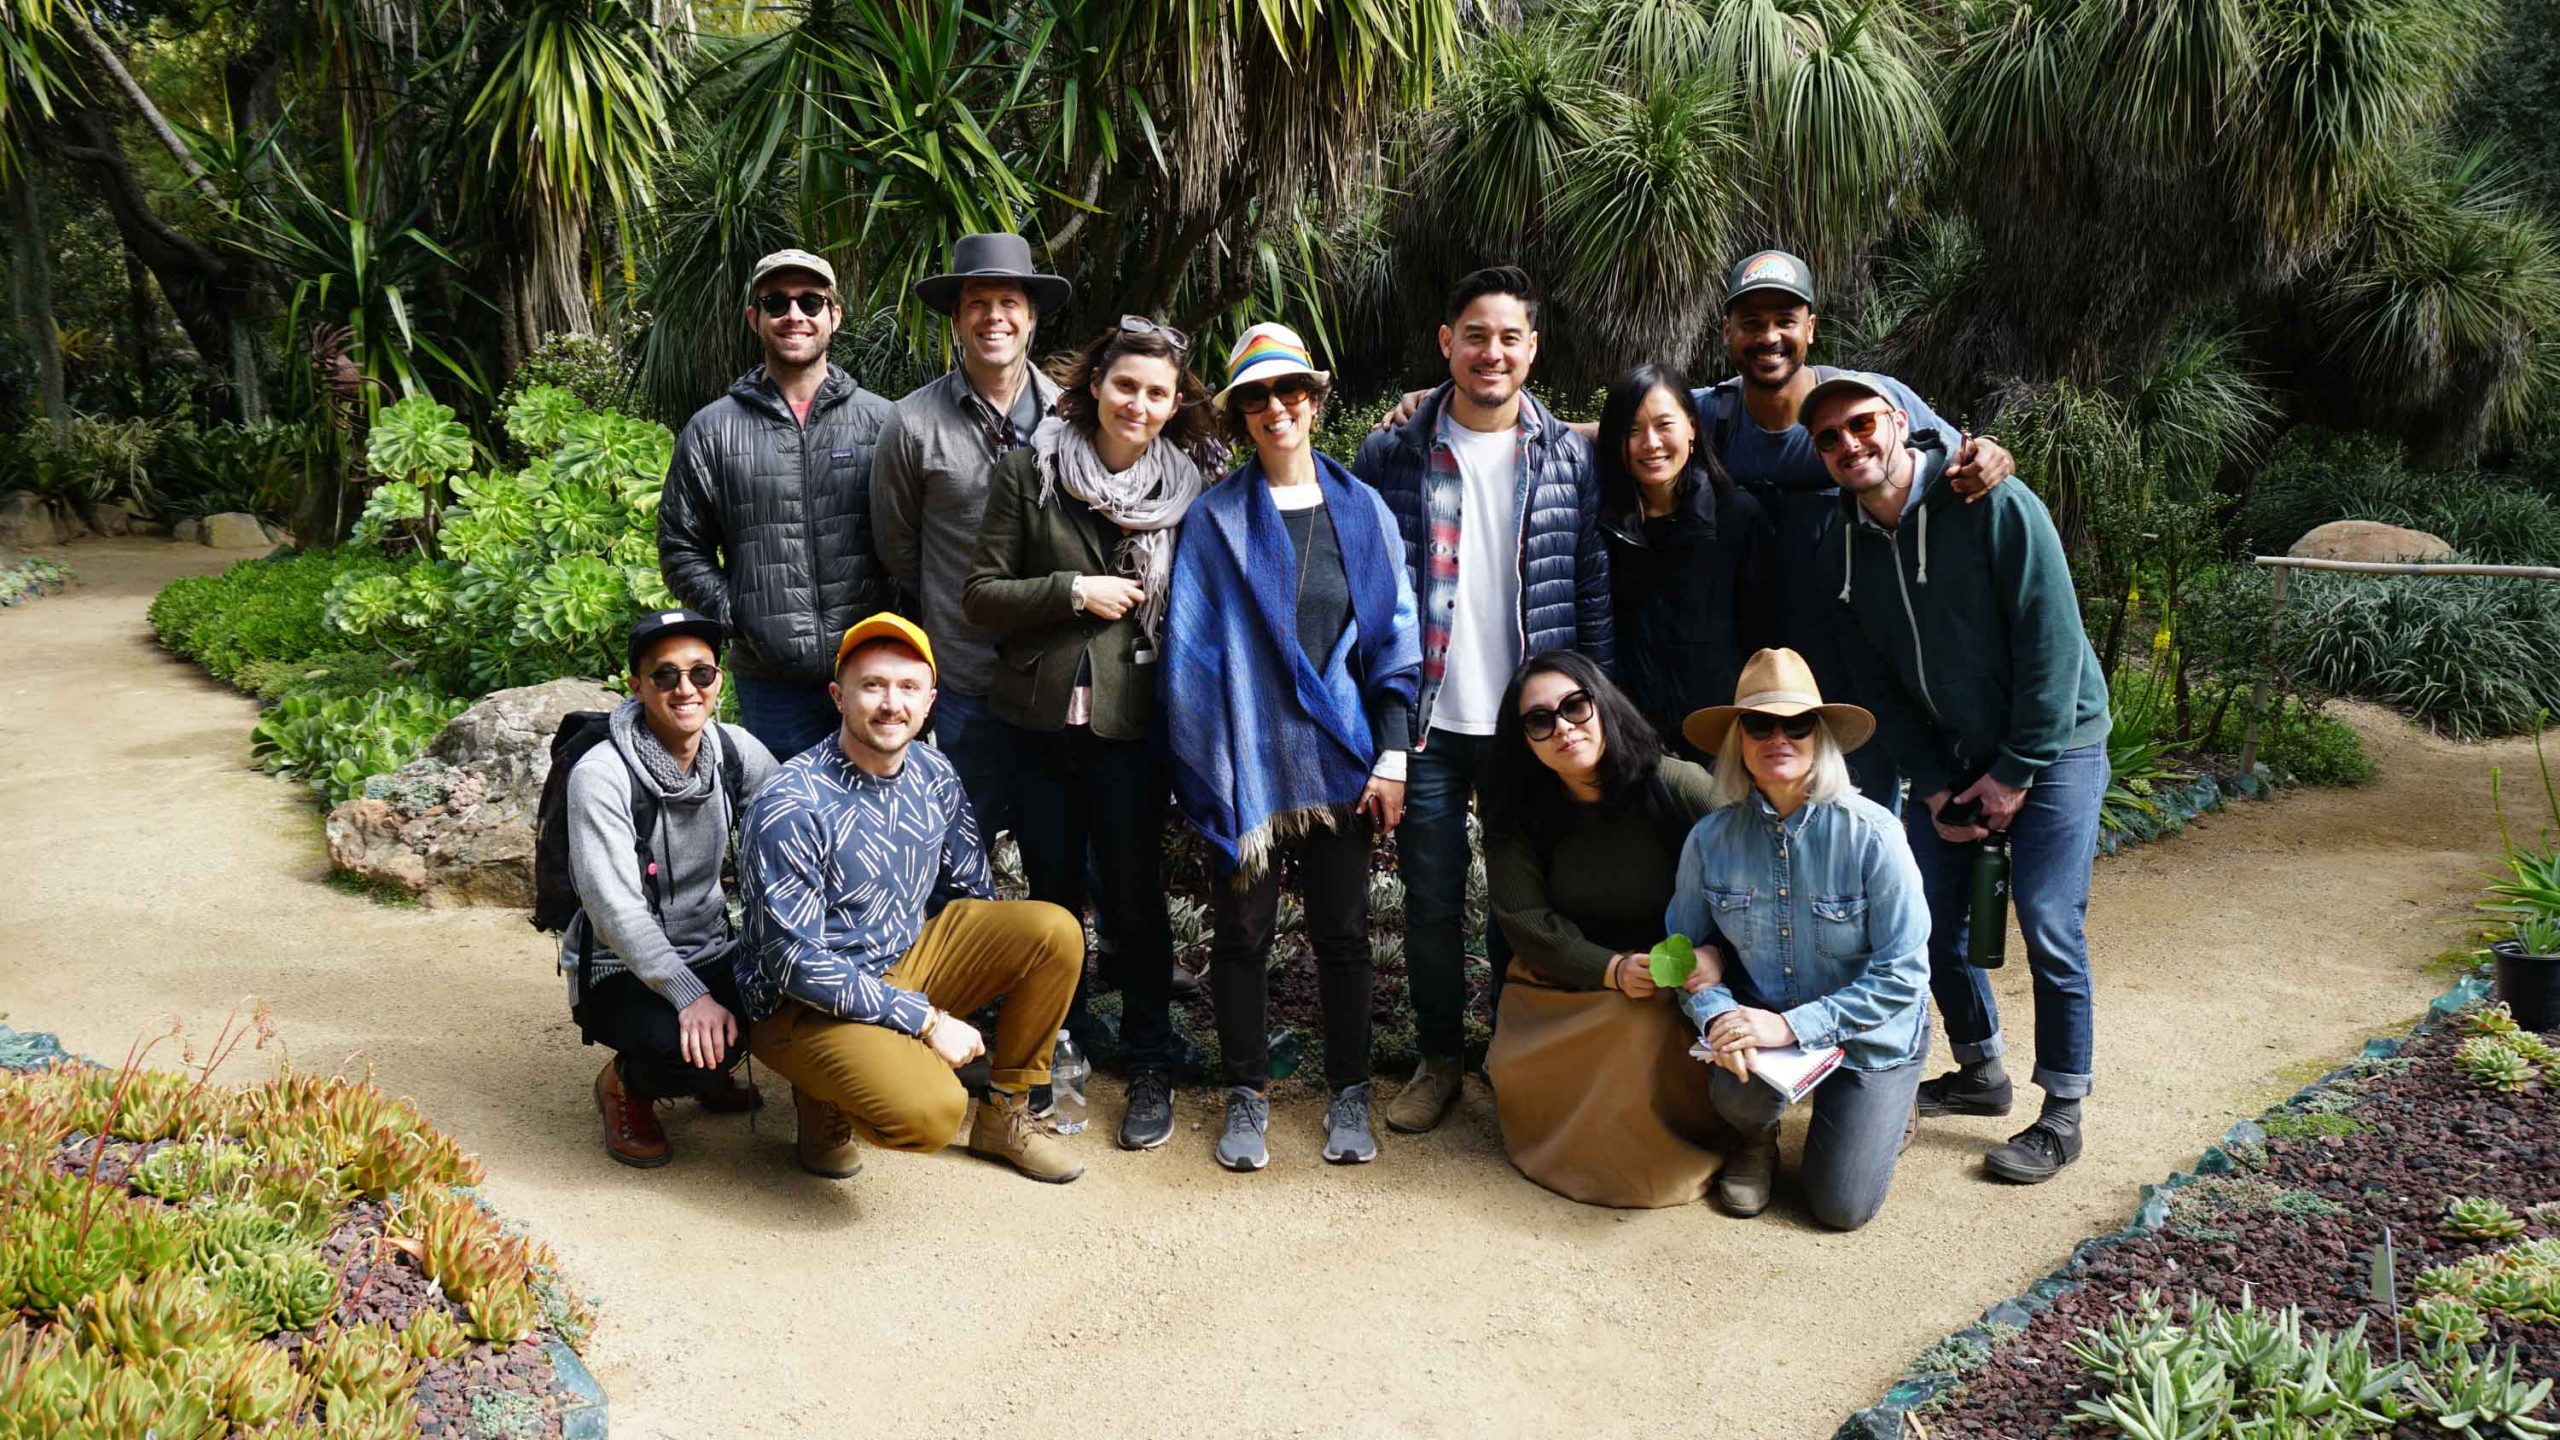 Landscape team gathered for group photo in front of landscaping at Lotusland